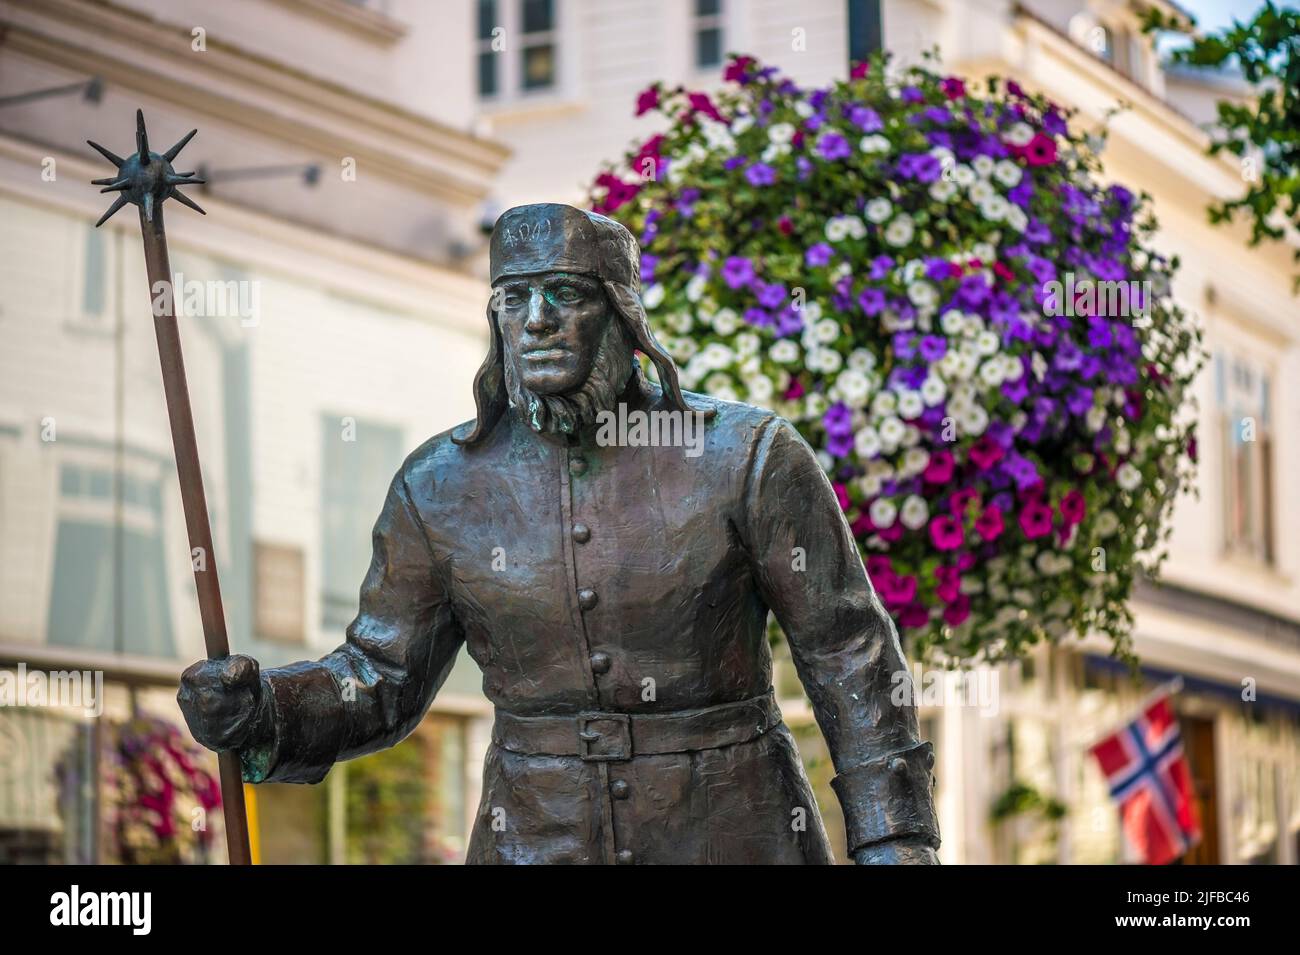 Norway, Rogaland county, Stavanger, bronze Viking statue in the city center Stock Photo